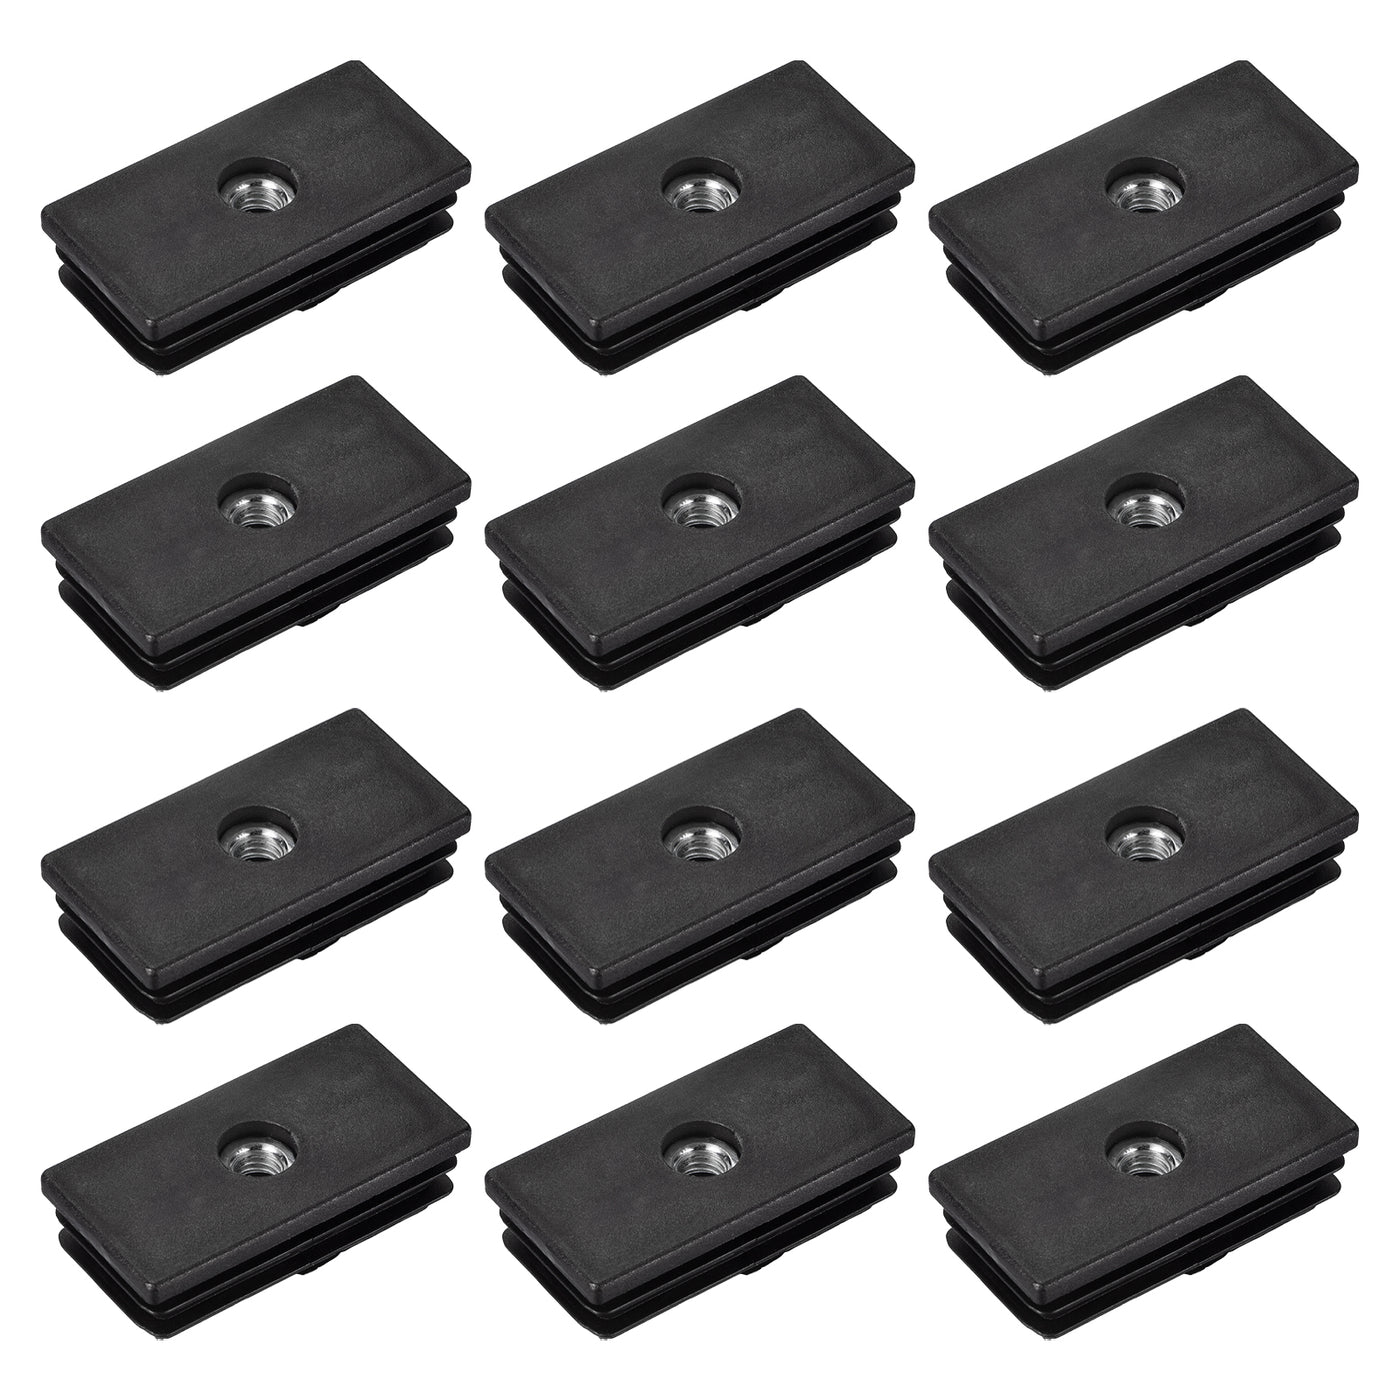 uxcell Uxcell 12Pcs 2.36"x1.18" Caster Insert with Thread, Rectangle M8 Thread for Furniture